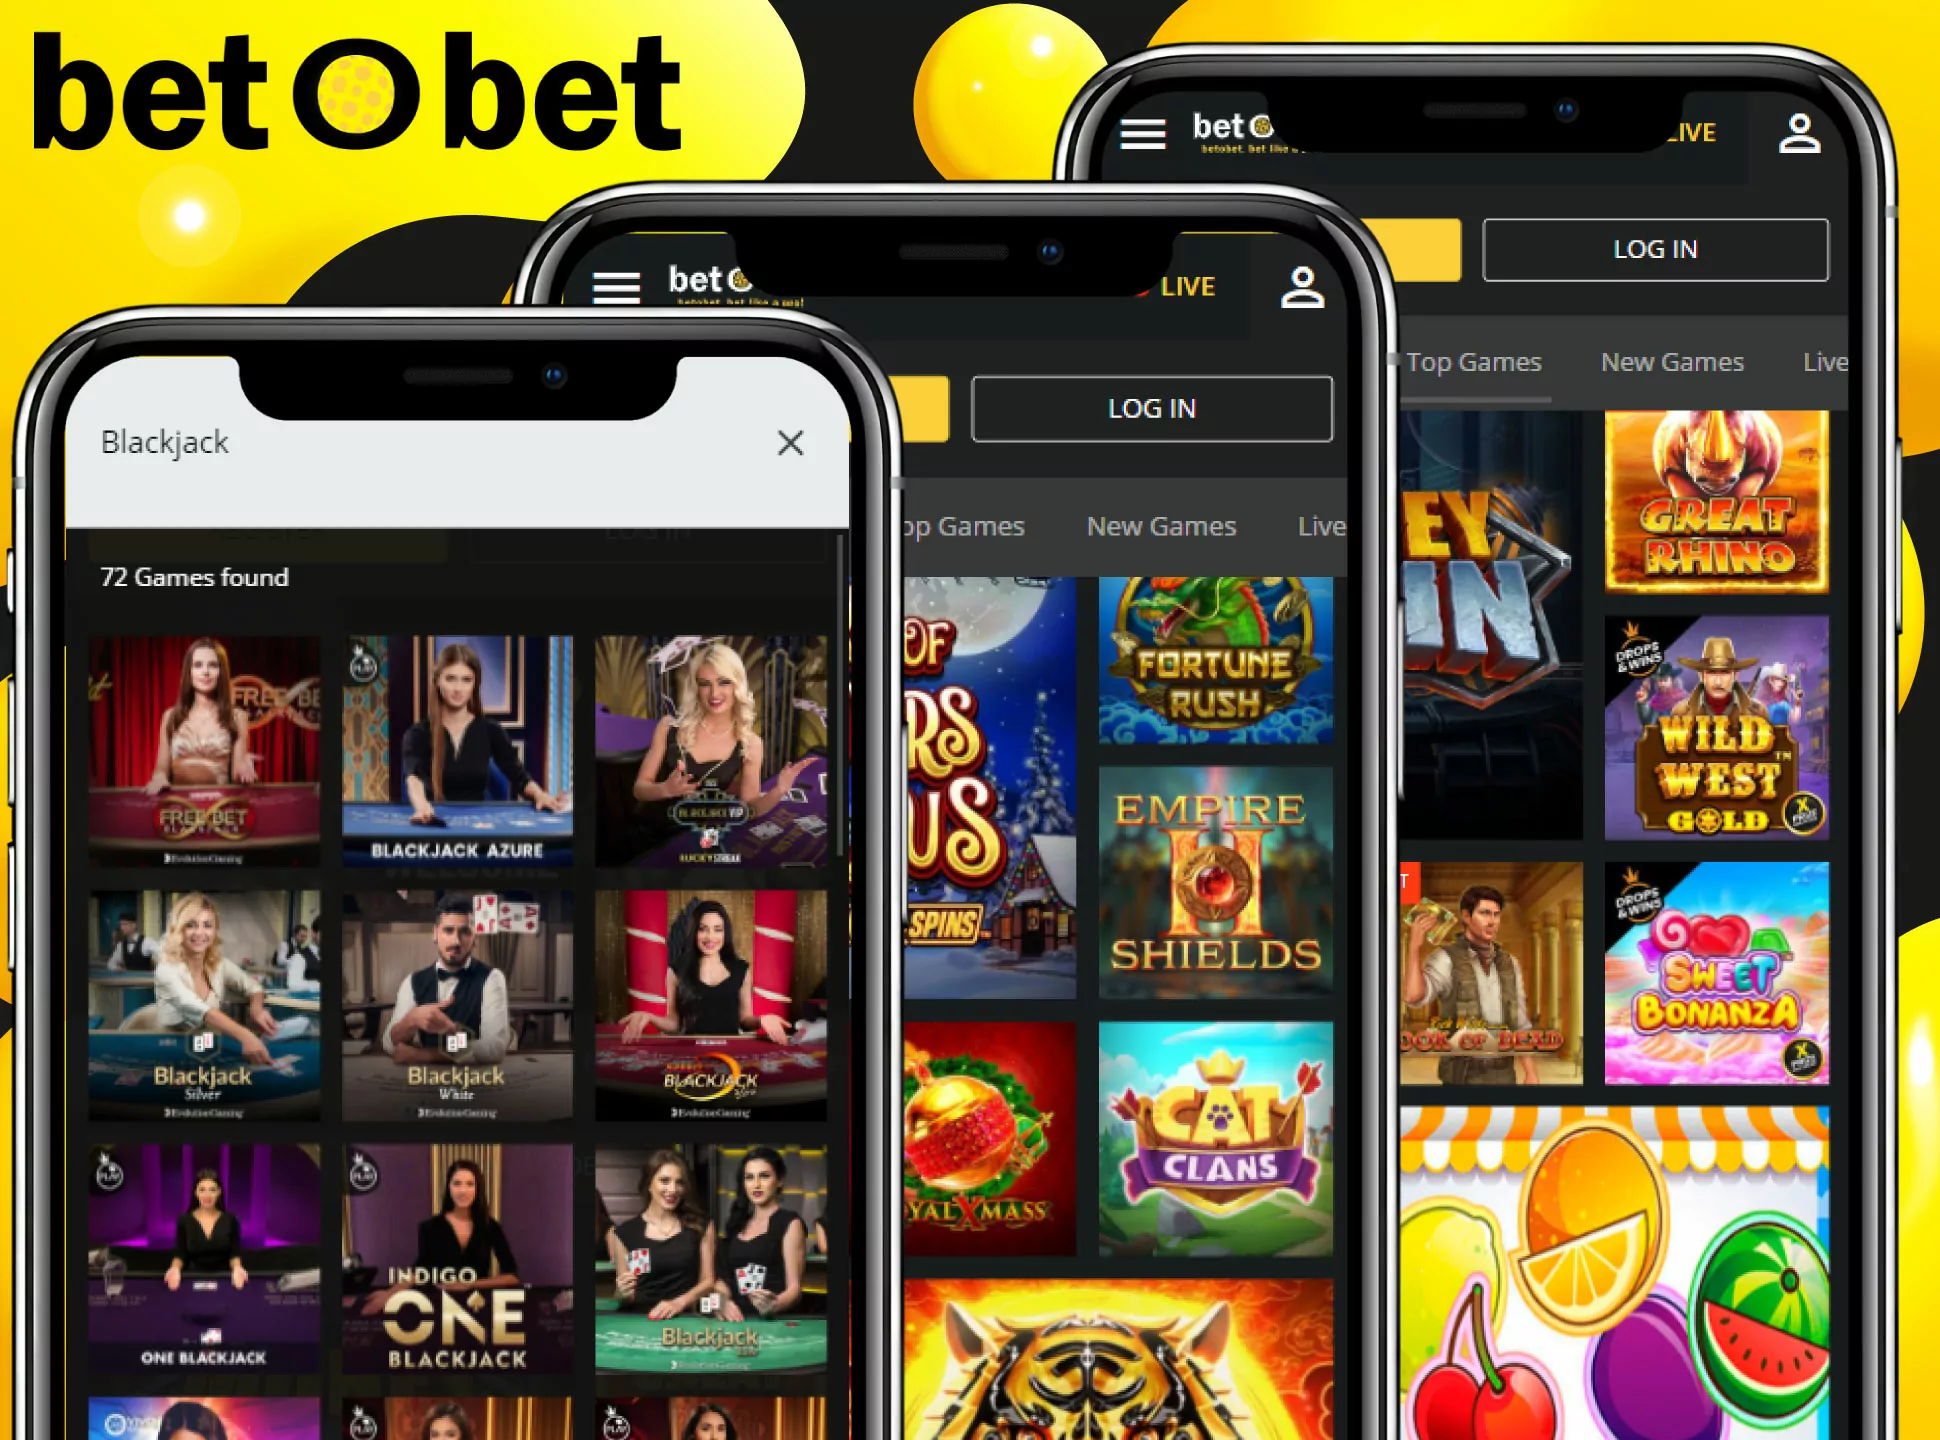 Open the casino page and choose the game.